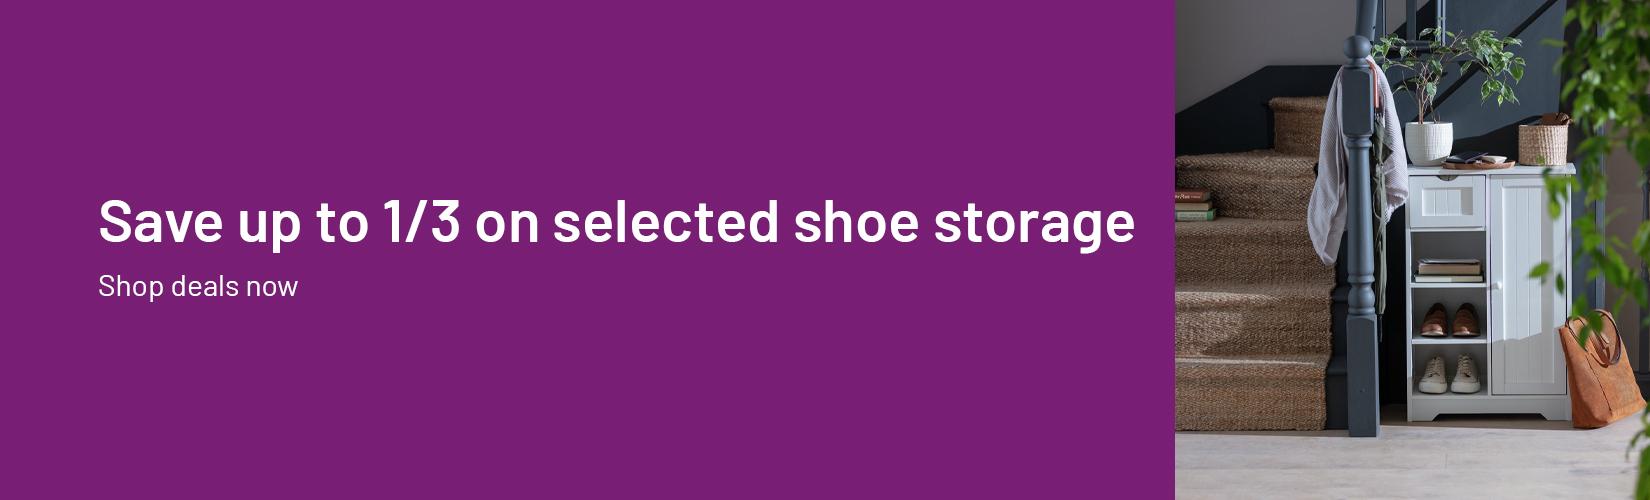 Save up to 1/3 on selected shoe storage.